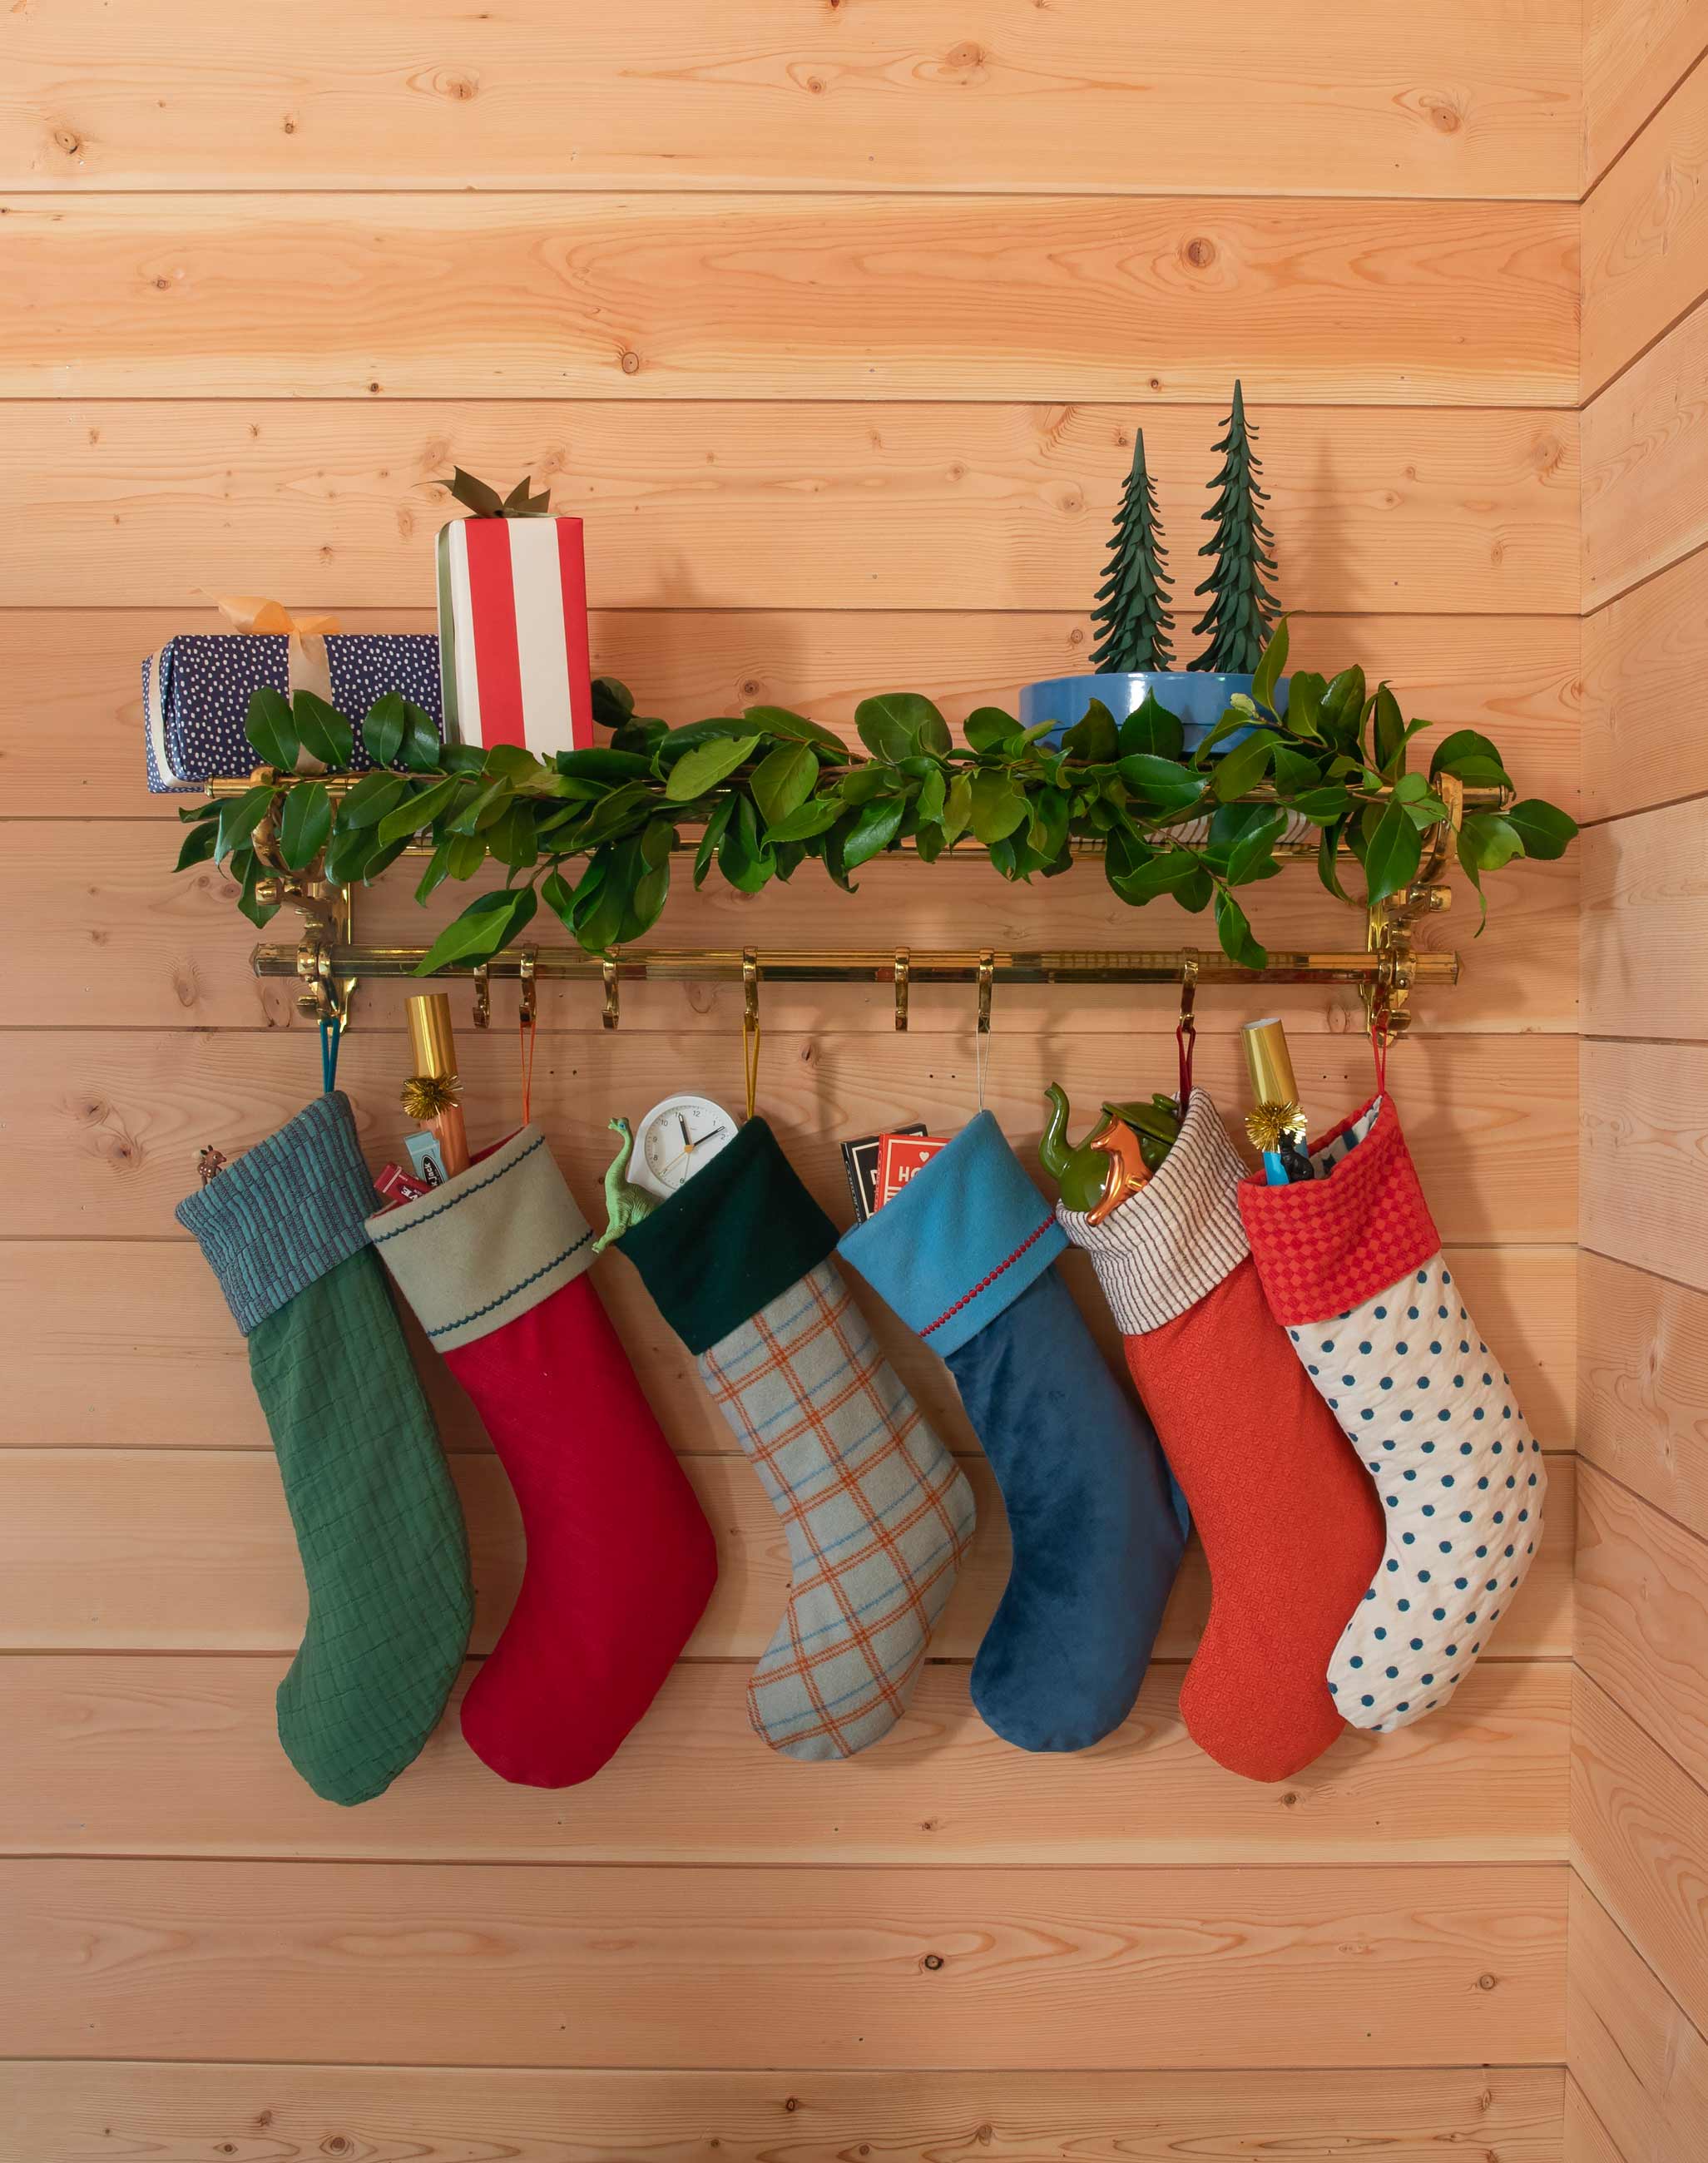 Colorful stockings hanging on gold peg rail with shelf above holding greenery and holiday decor.